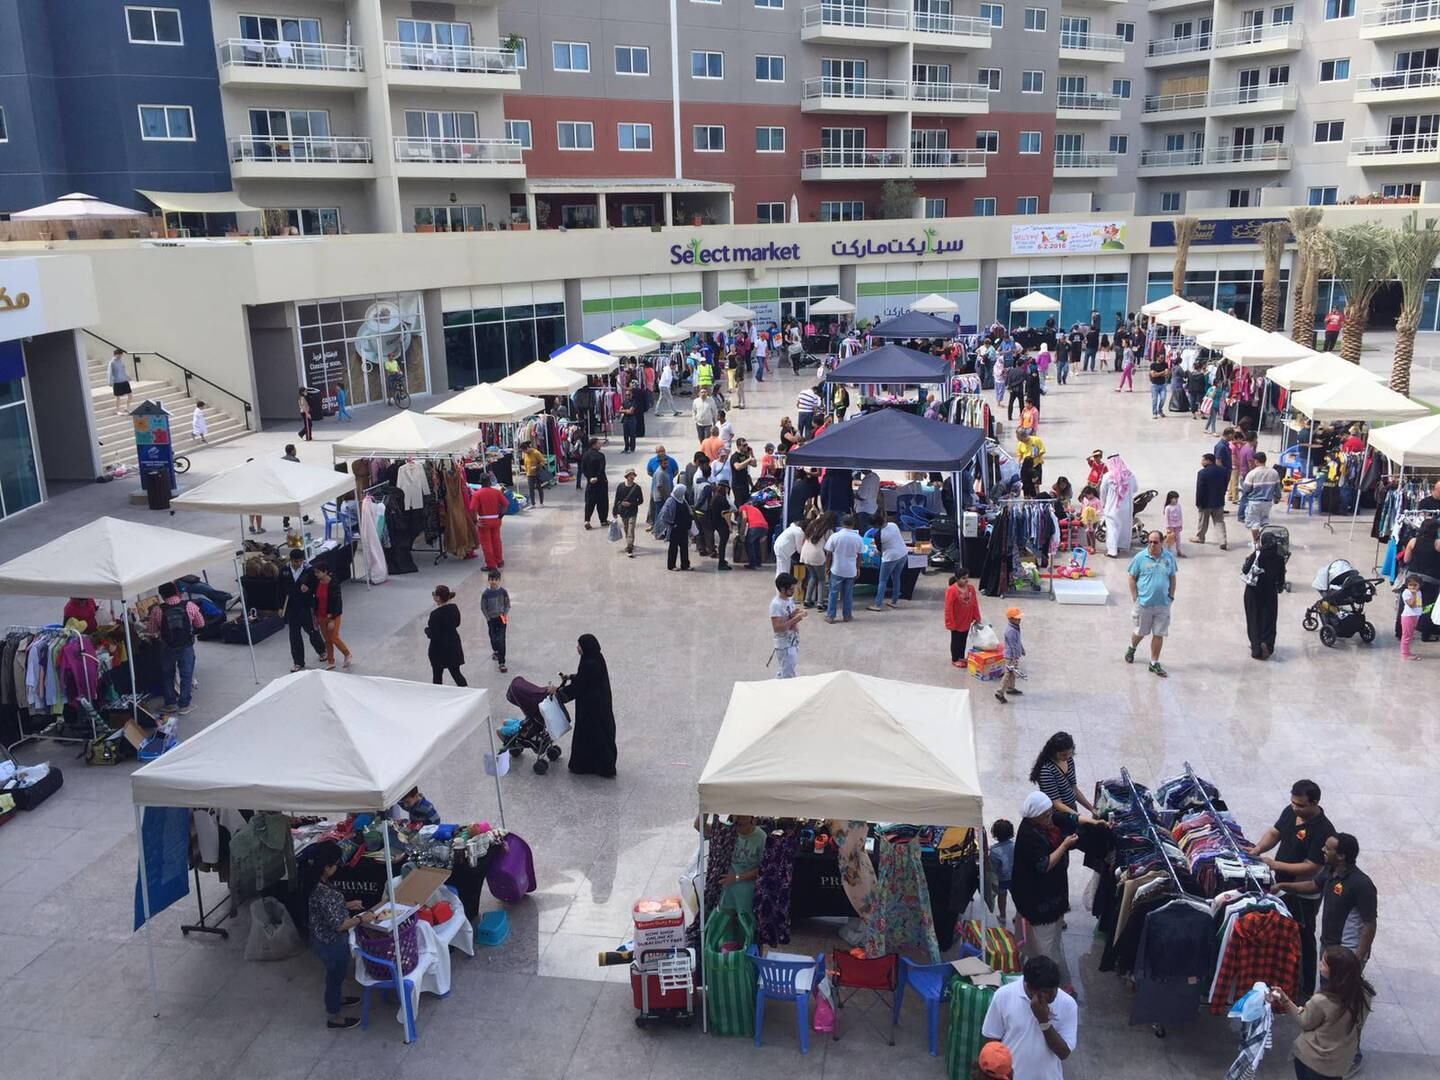 Visitors can enter the flea markets for free